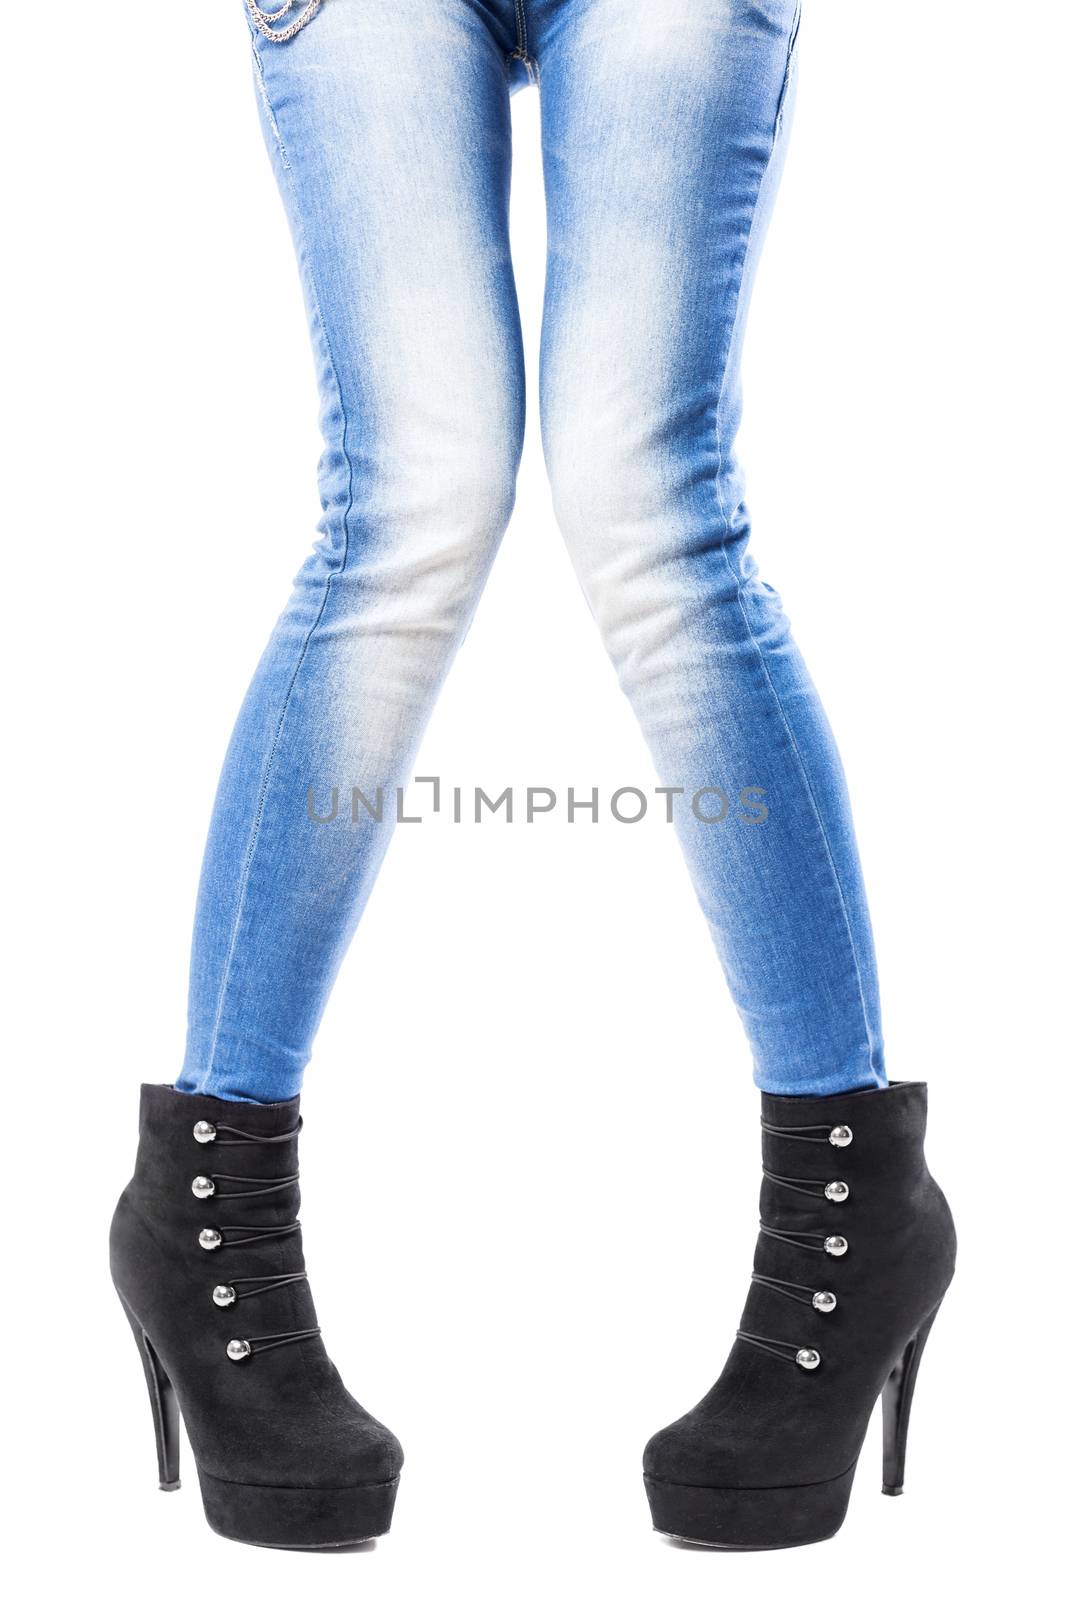 female legs in jeans and high heels by kokimk